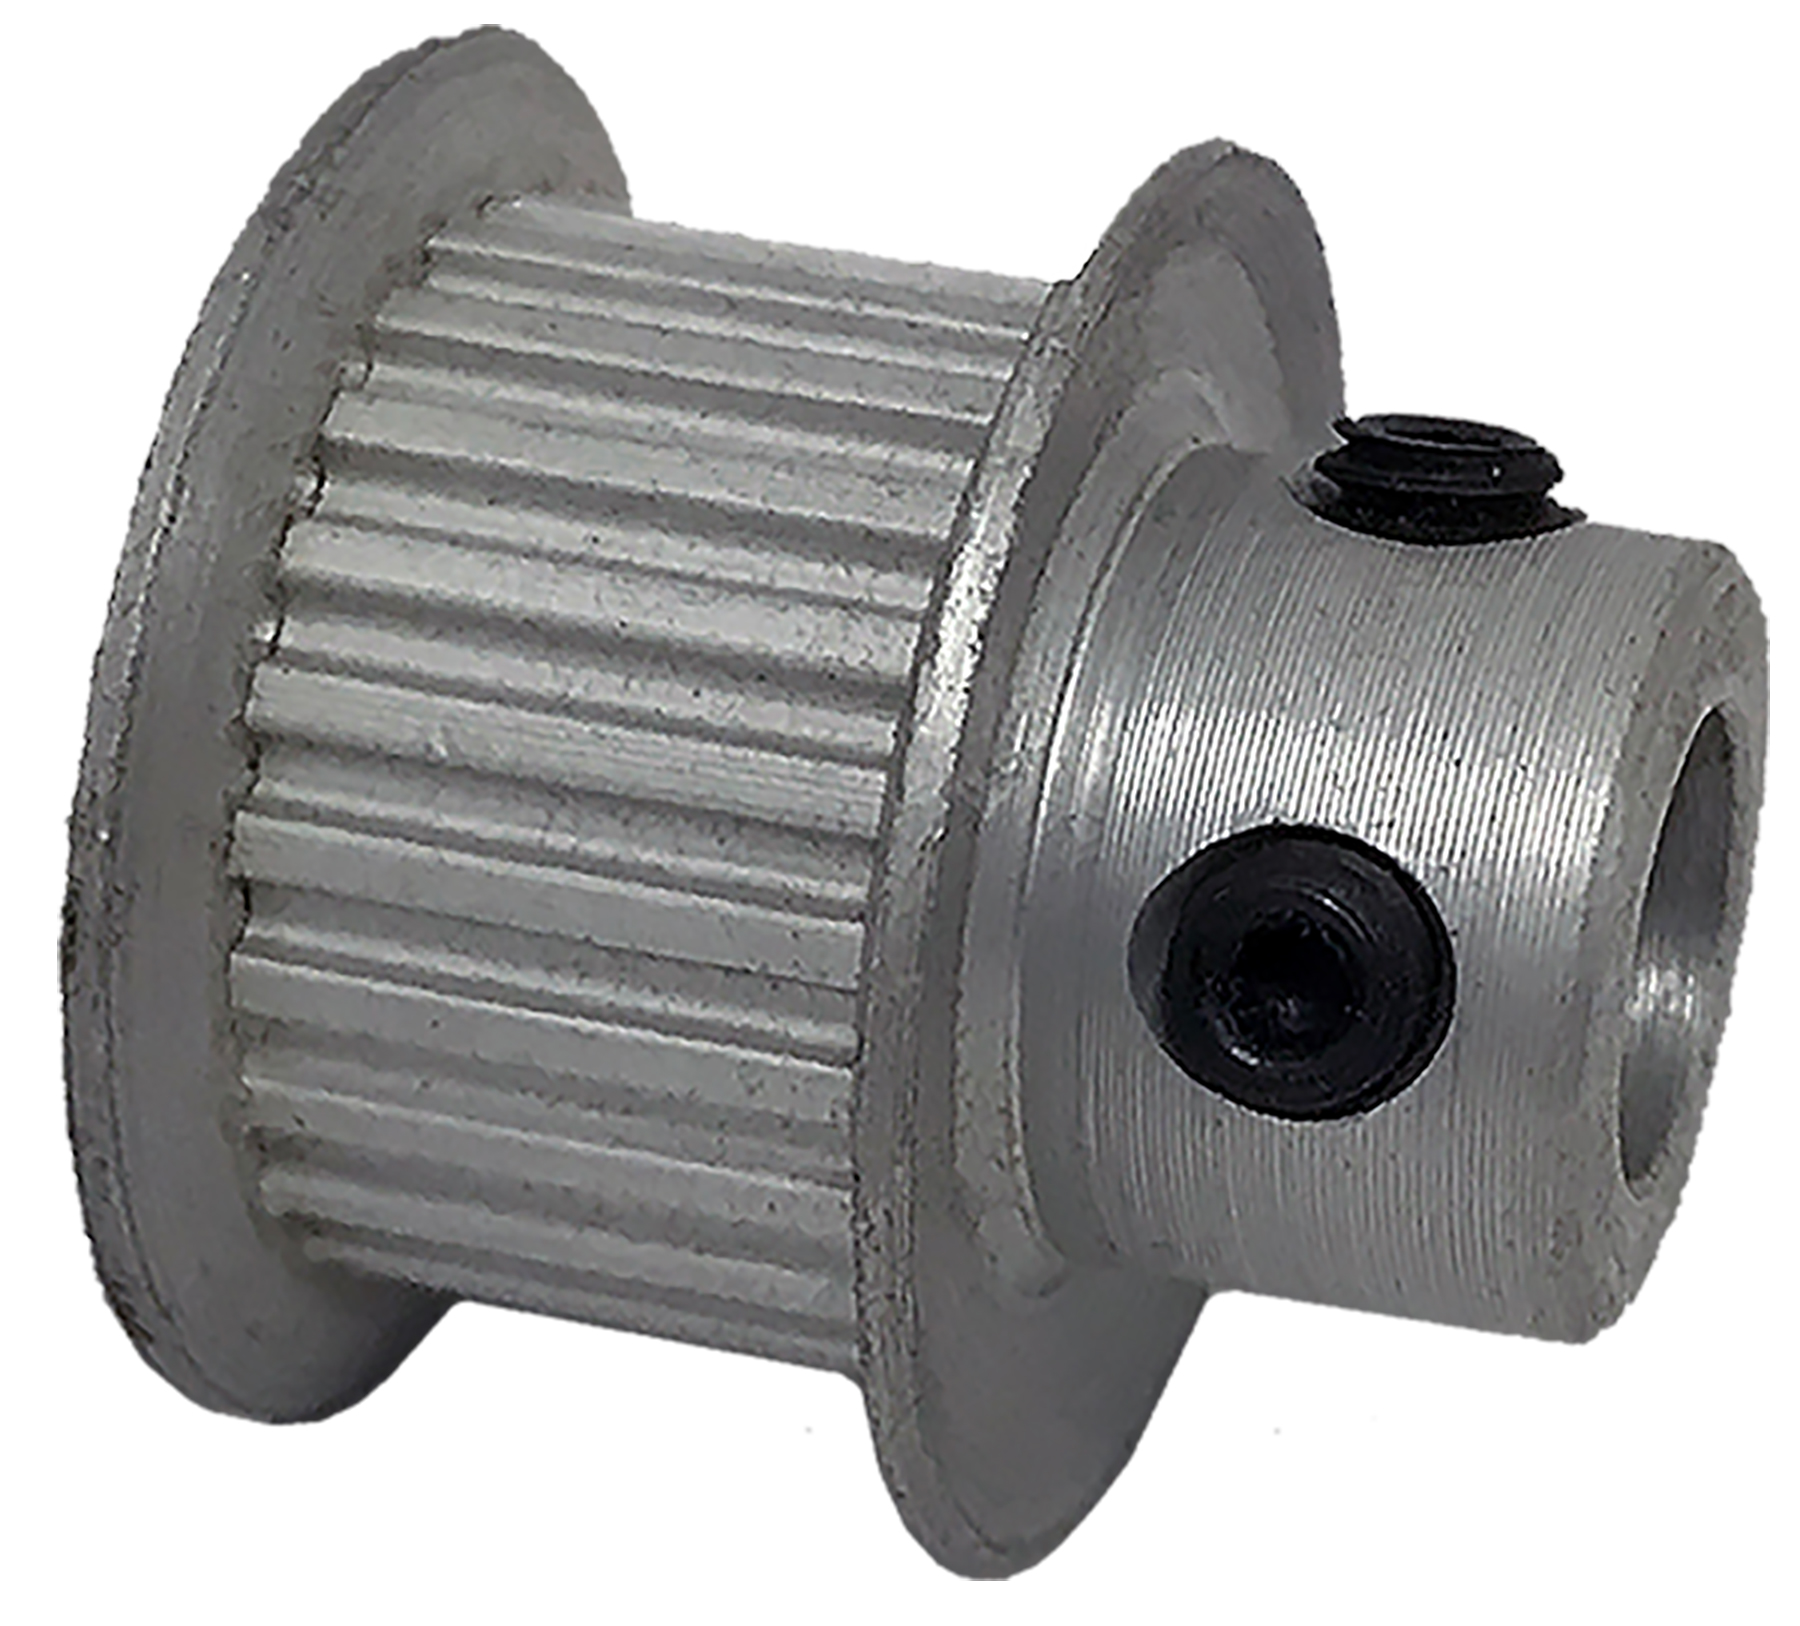 24LT312-6FA3 - Aluminum Imperial Pitch Pulleys